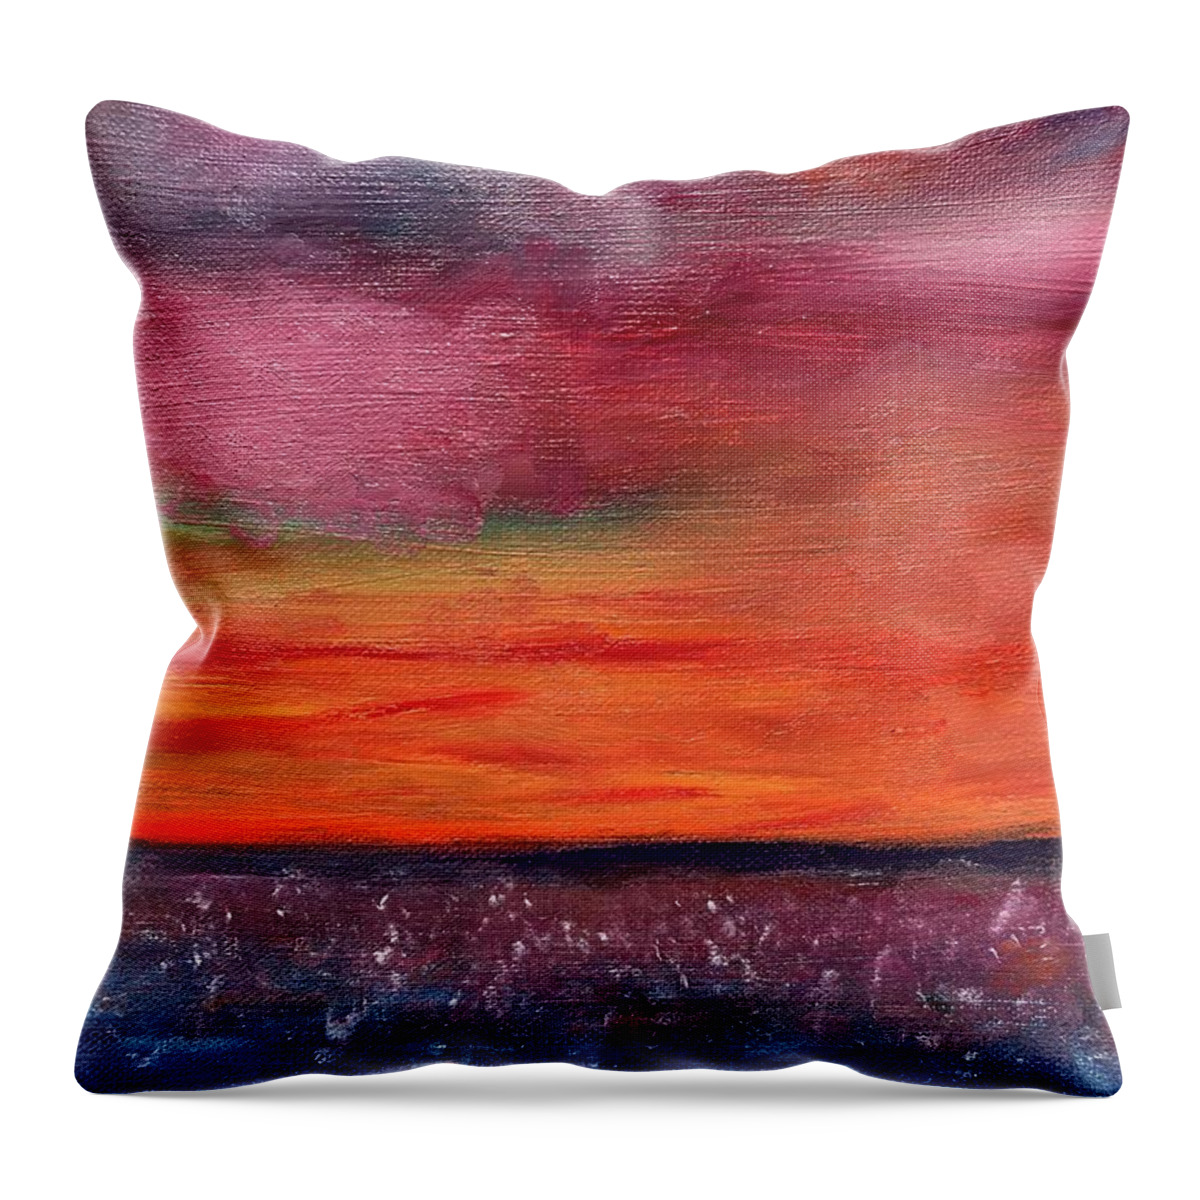 Pink Throw Pillow featuring the painting The Pink Sky by Susan Grunin